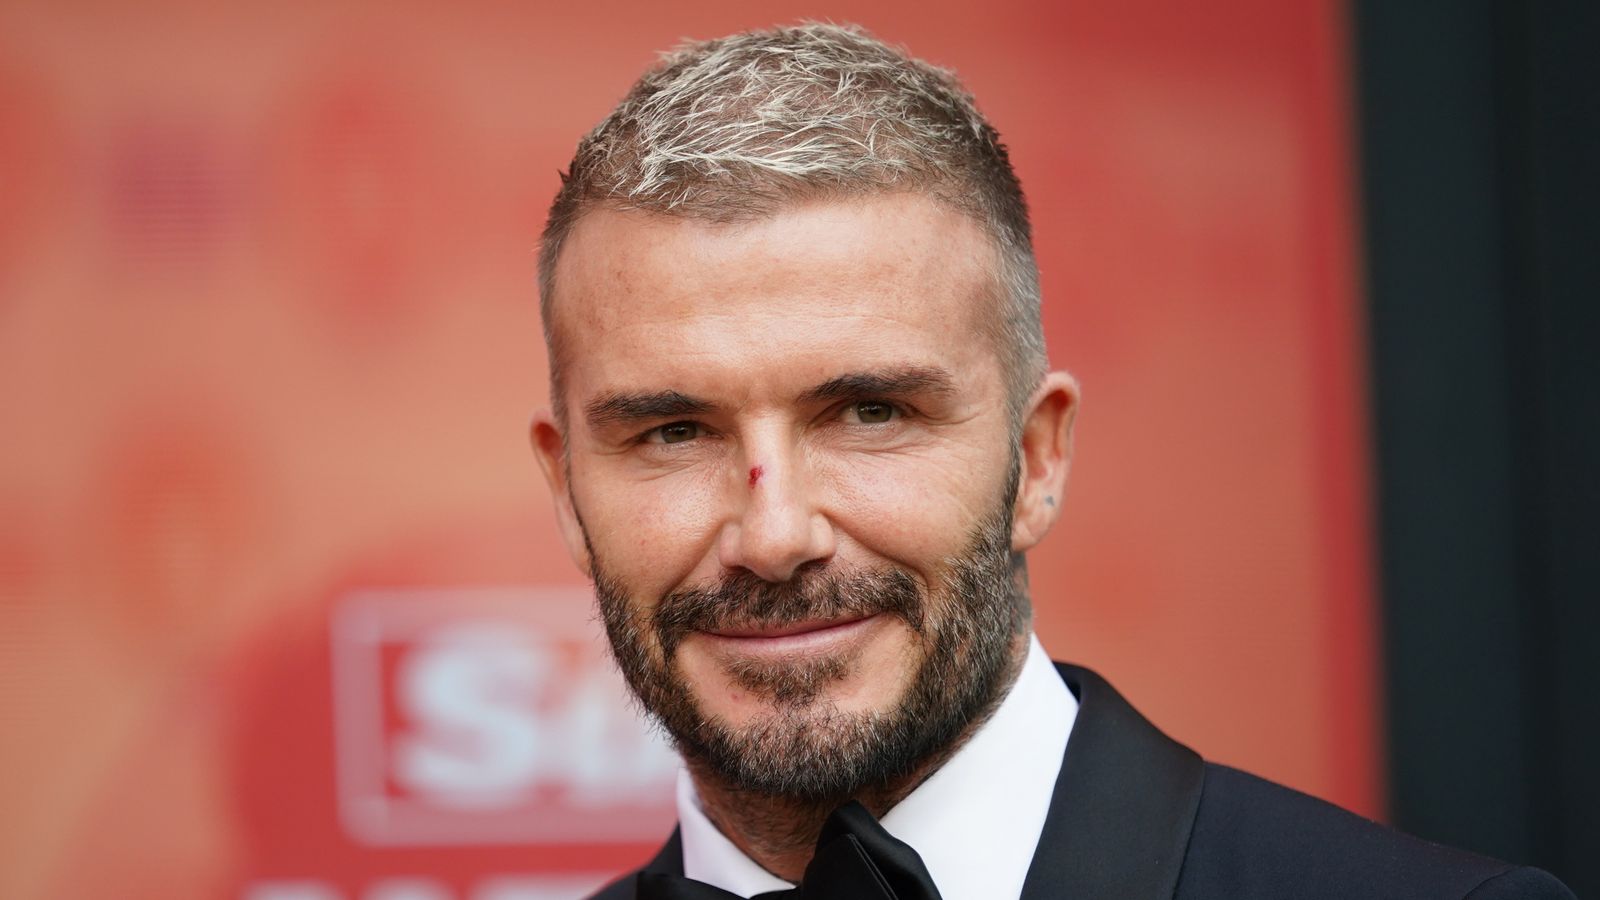 David Beckham was sent ‘threatening’ letters from stalker who turned up at his properties, court hears | Ents & Arts News